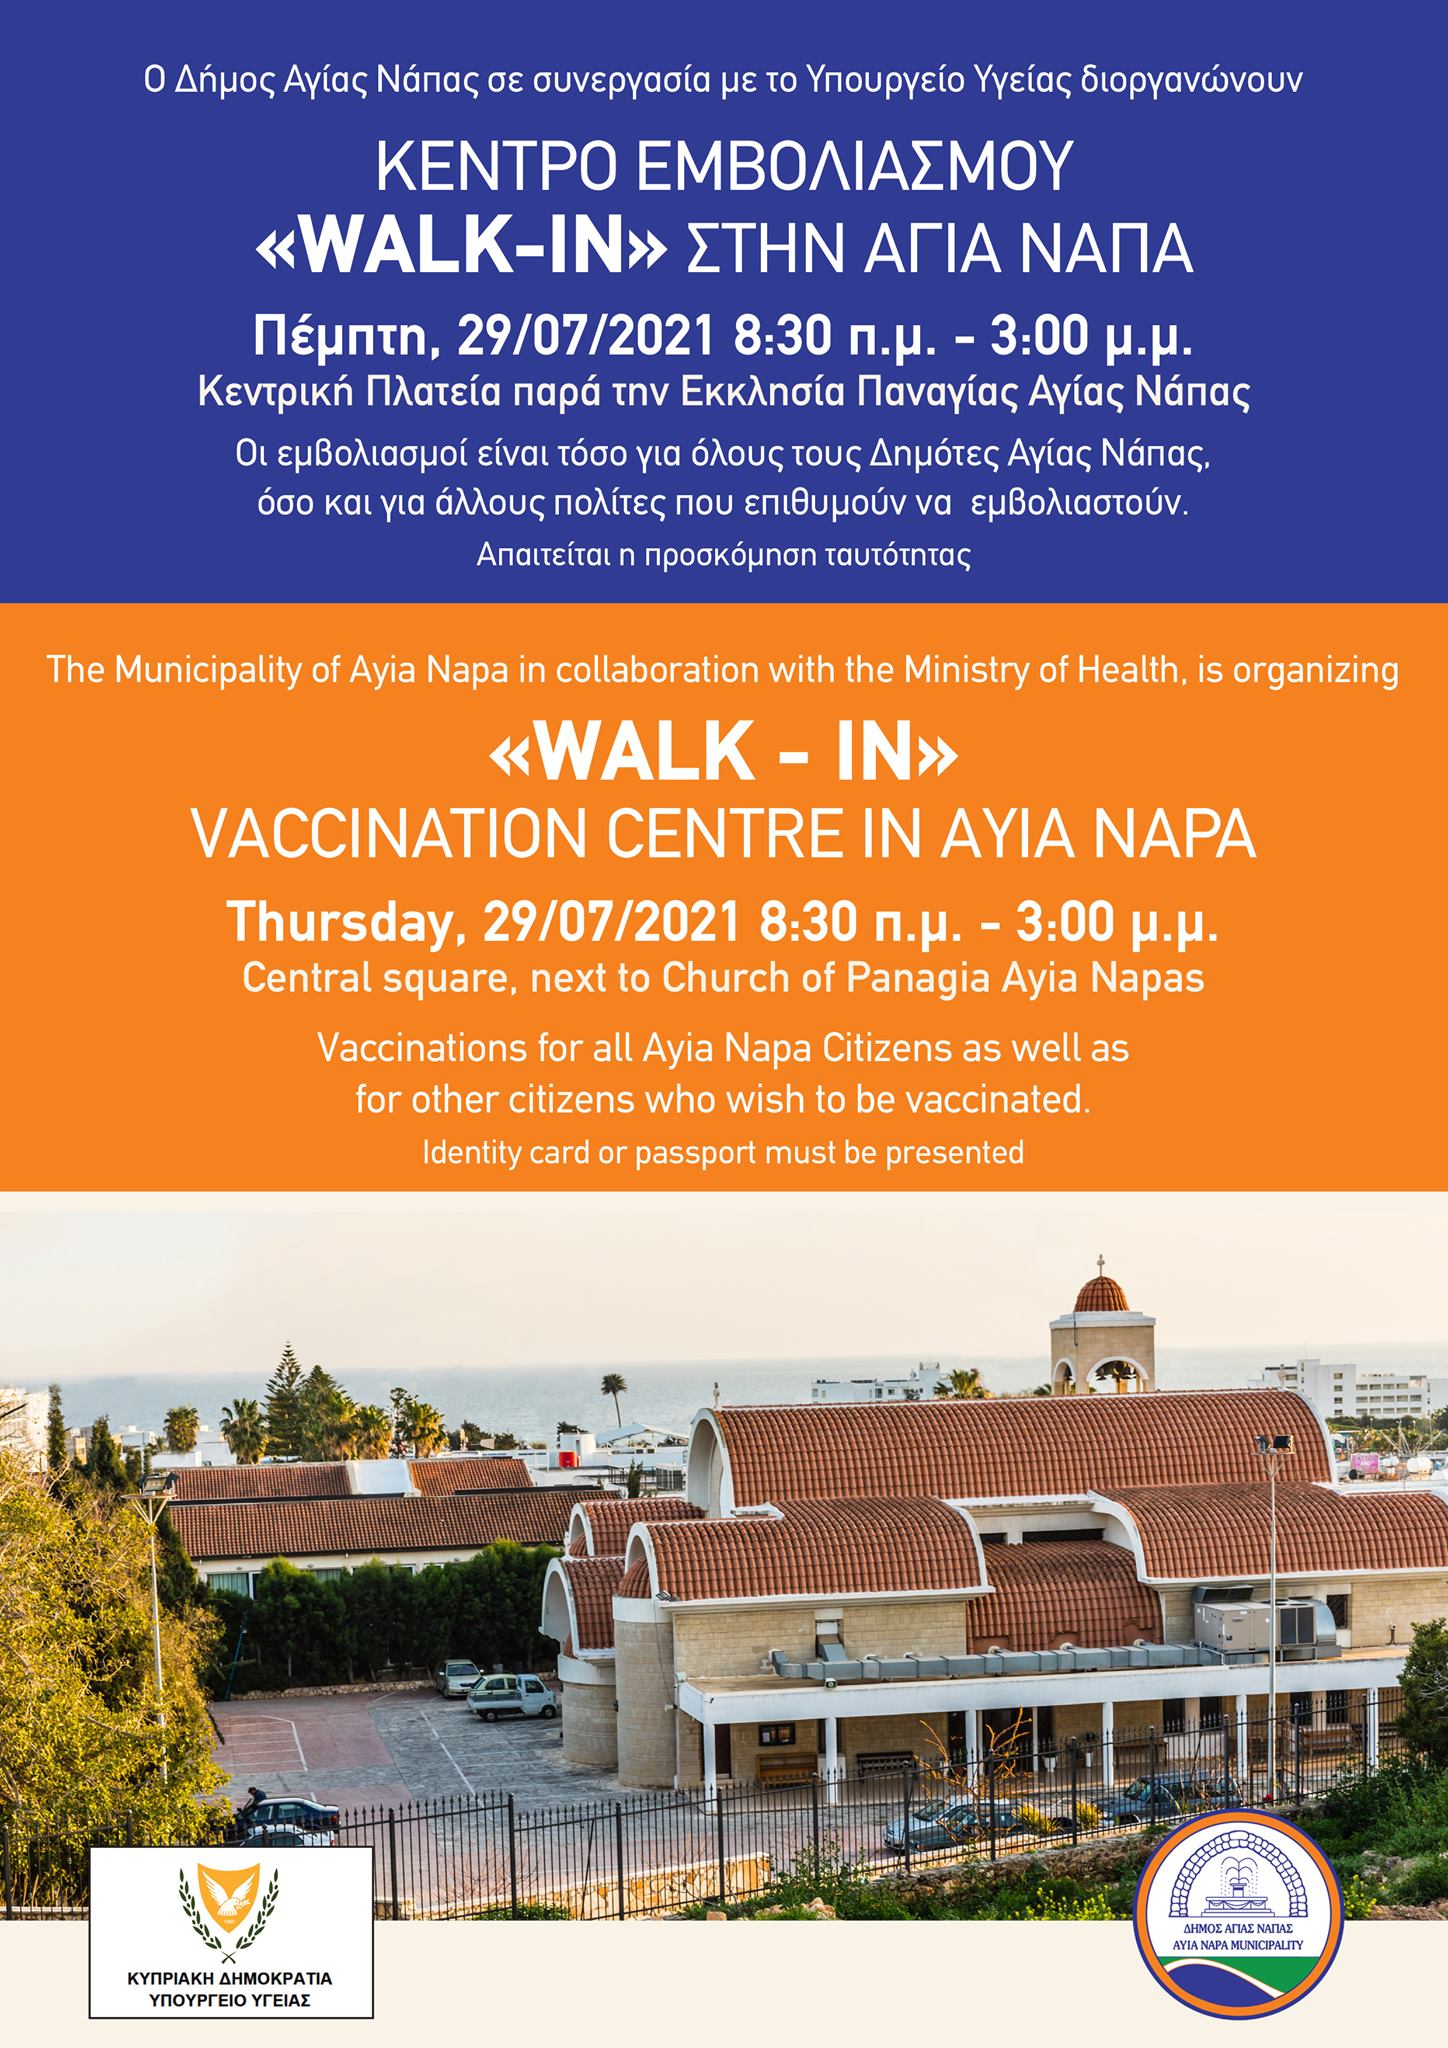 220677816 3944729108983182 6567098069599724782 n exclusive, WALK IN, Municipality of Ayia Napa, VACCINATION CENTER